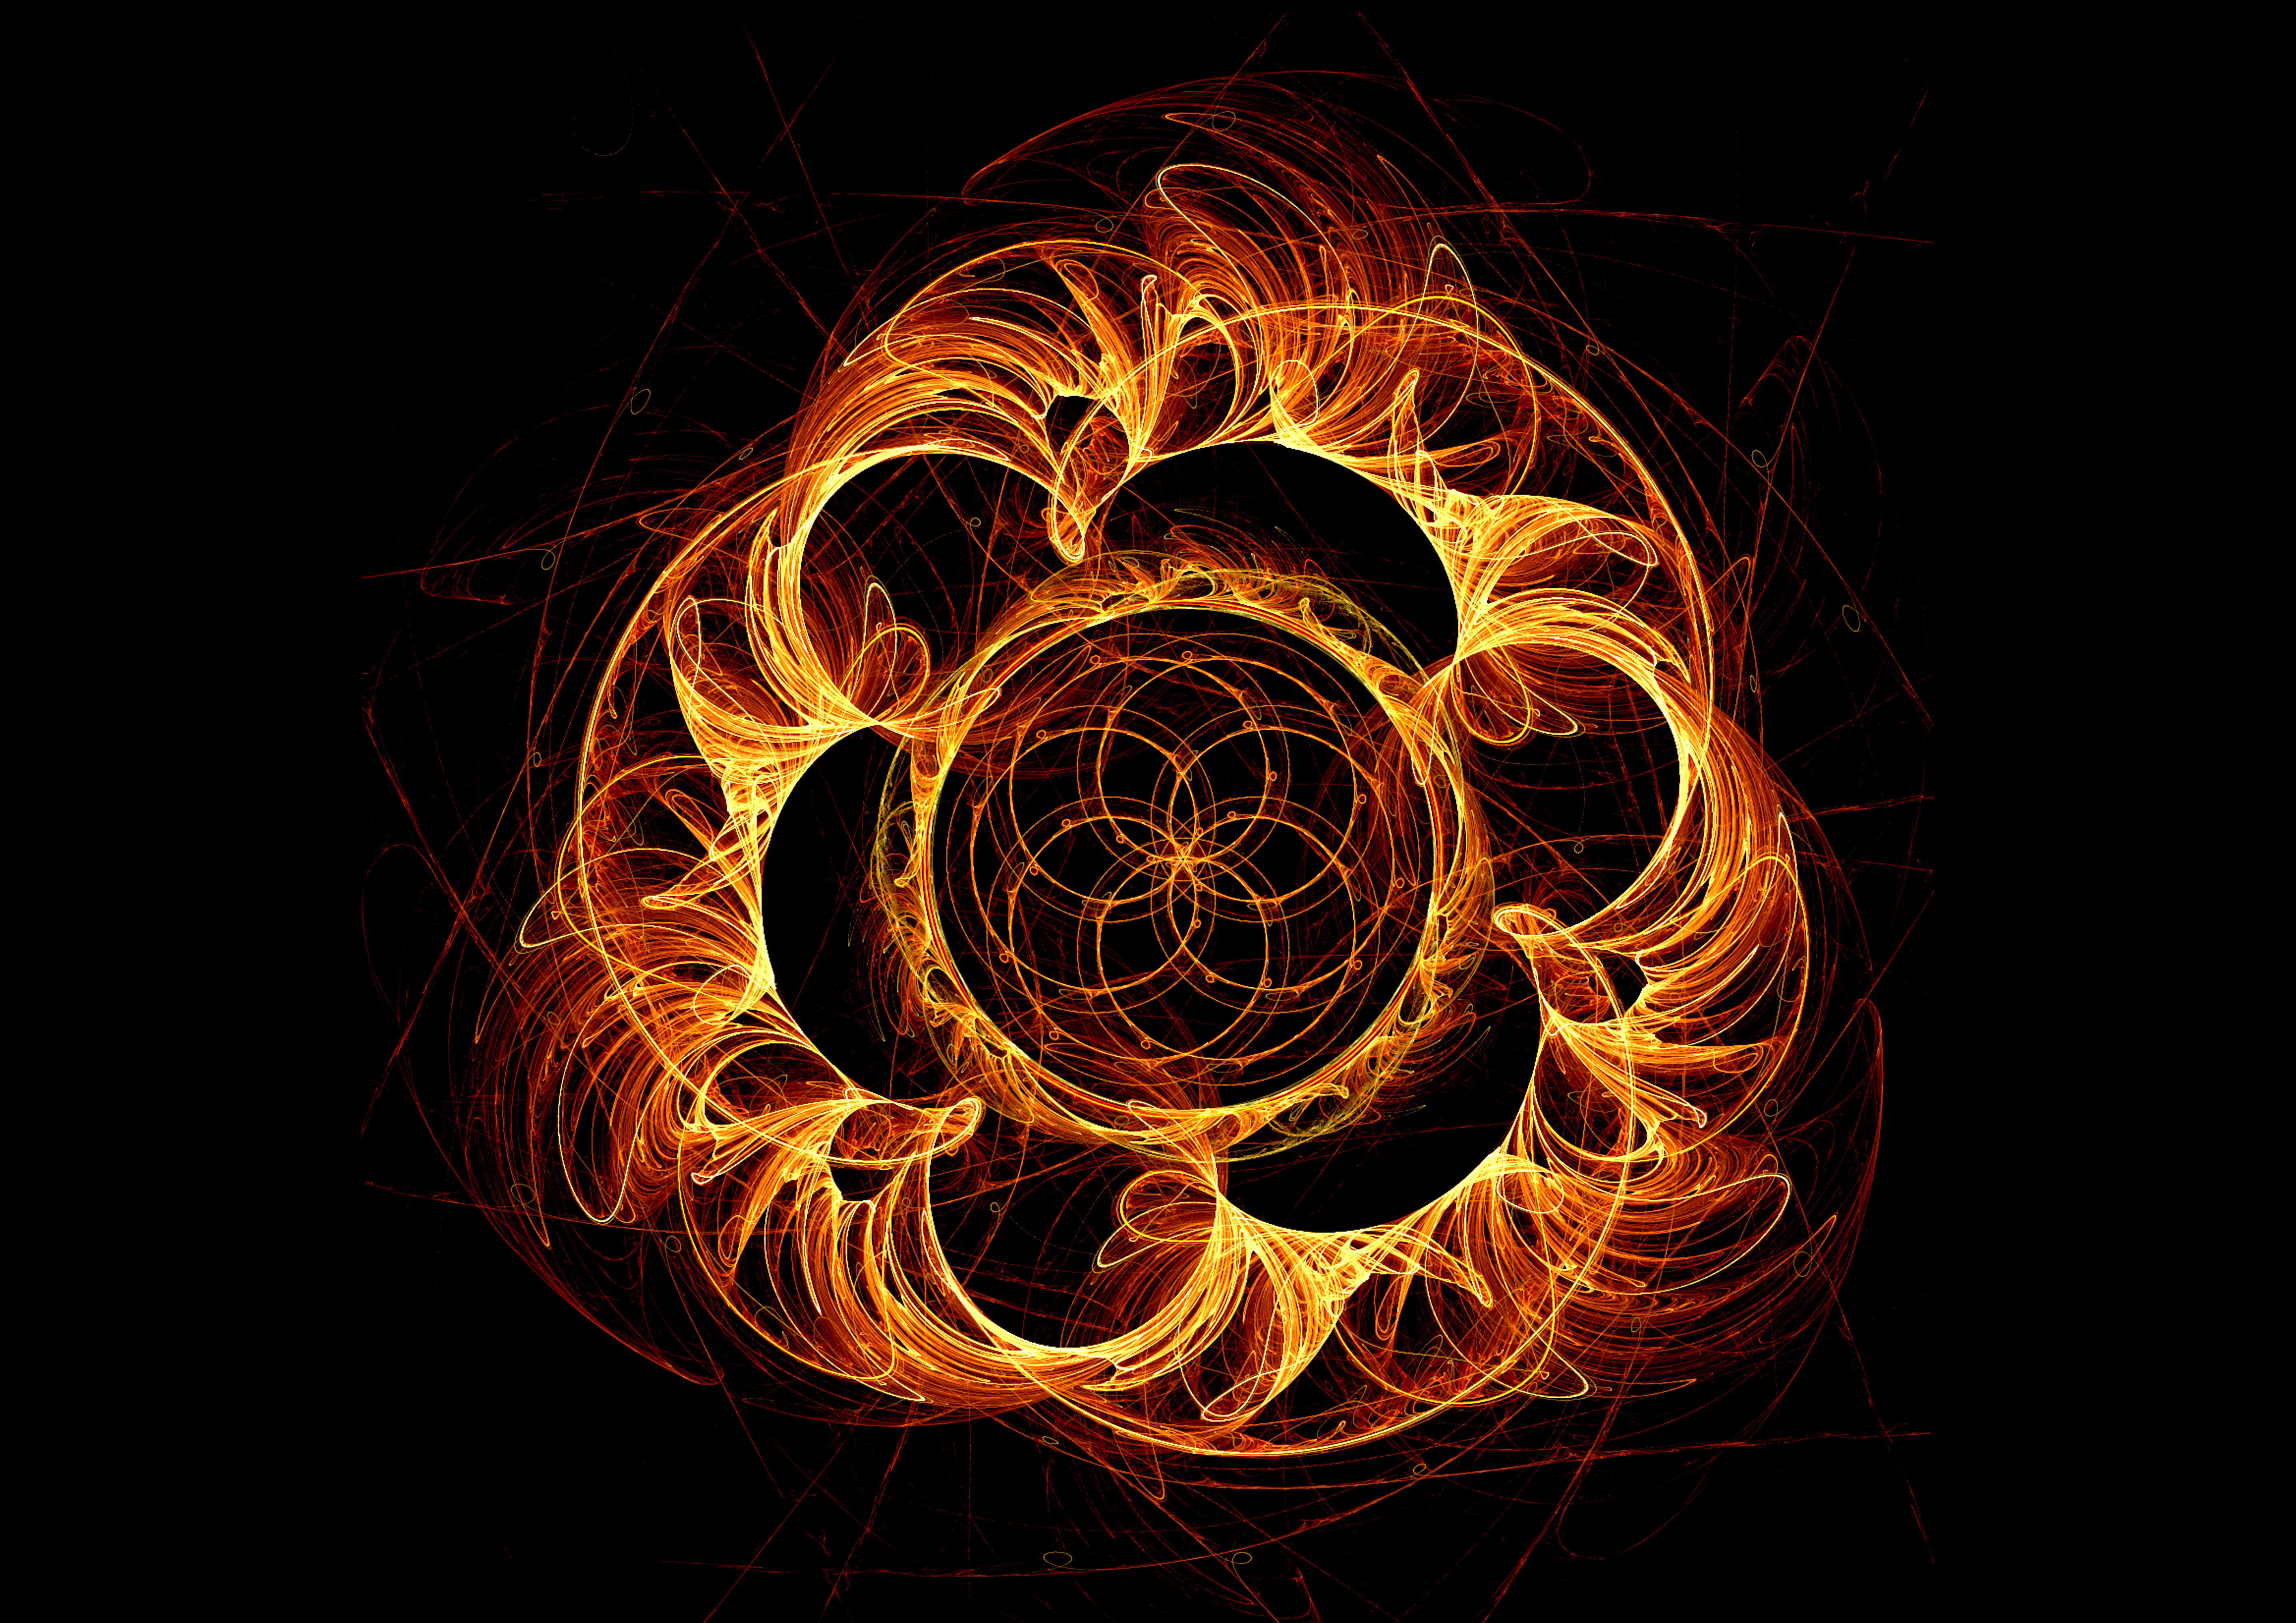 abstract, bright, fractal, confused, intricate, flaming, swirling, involute, fiery